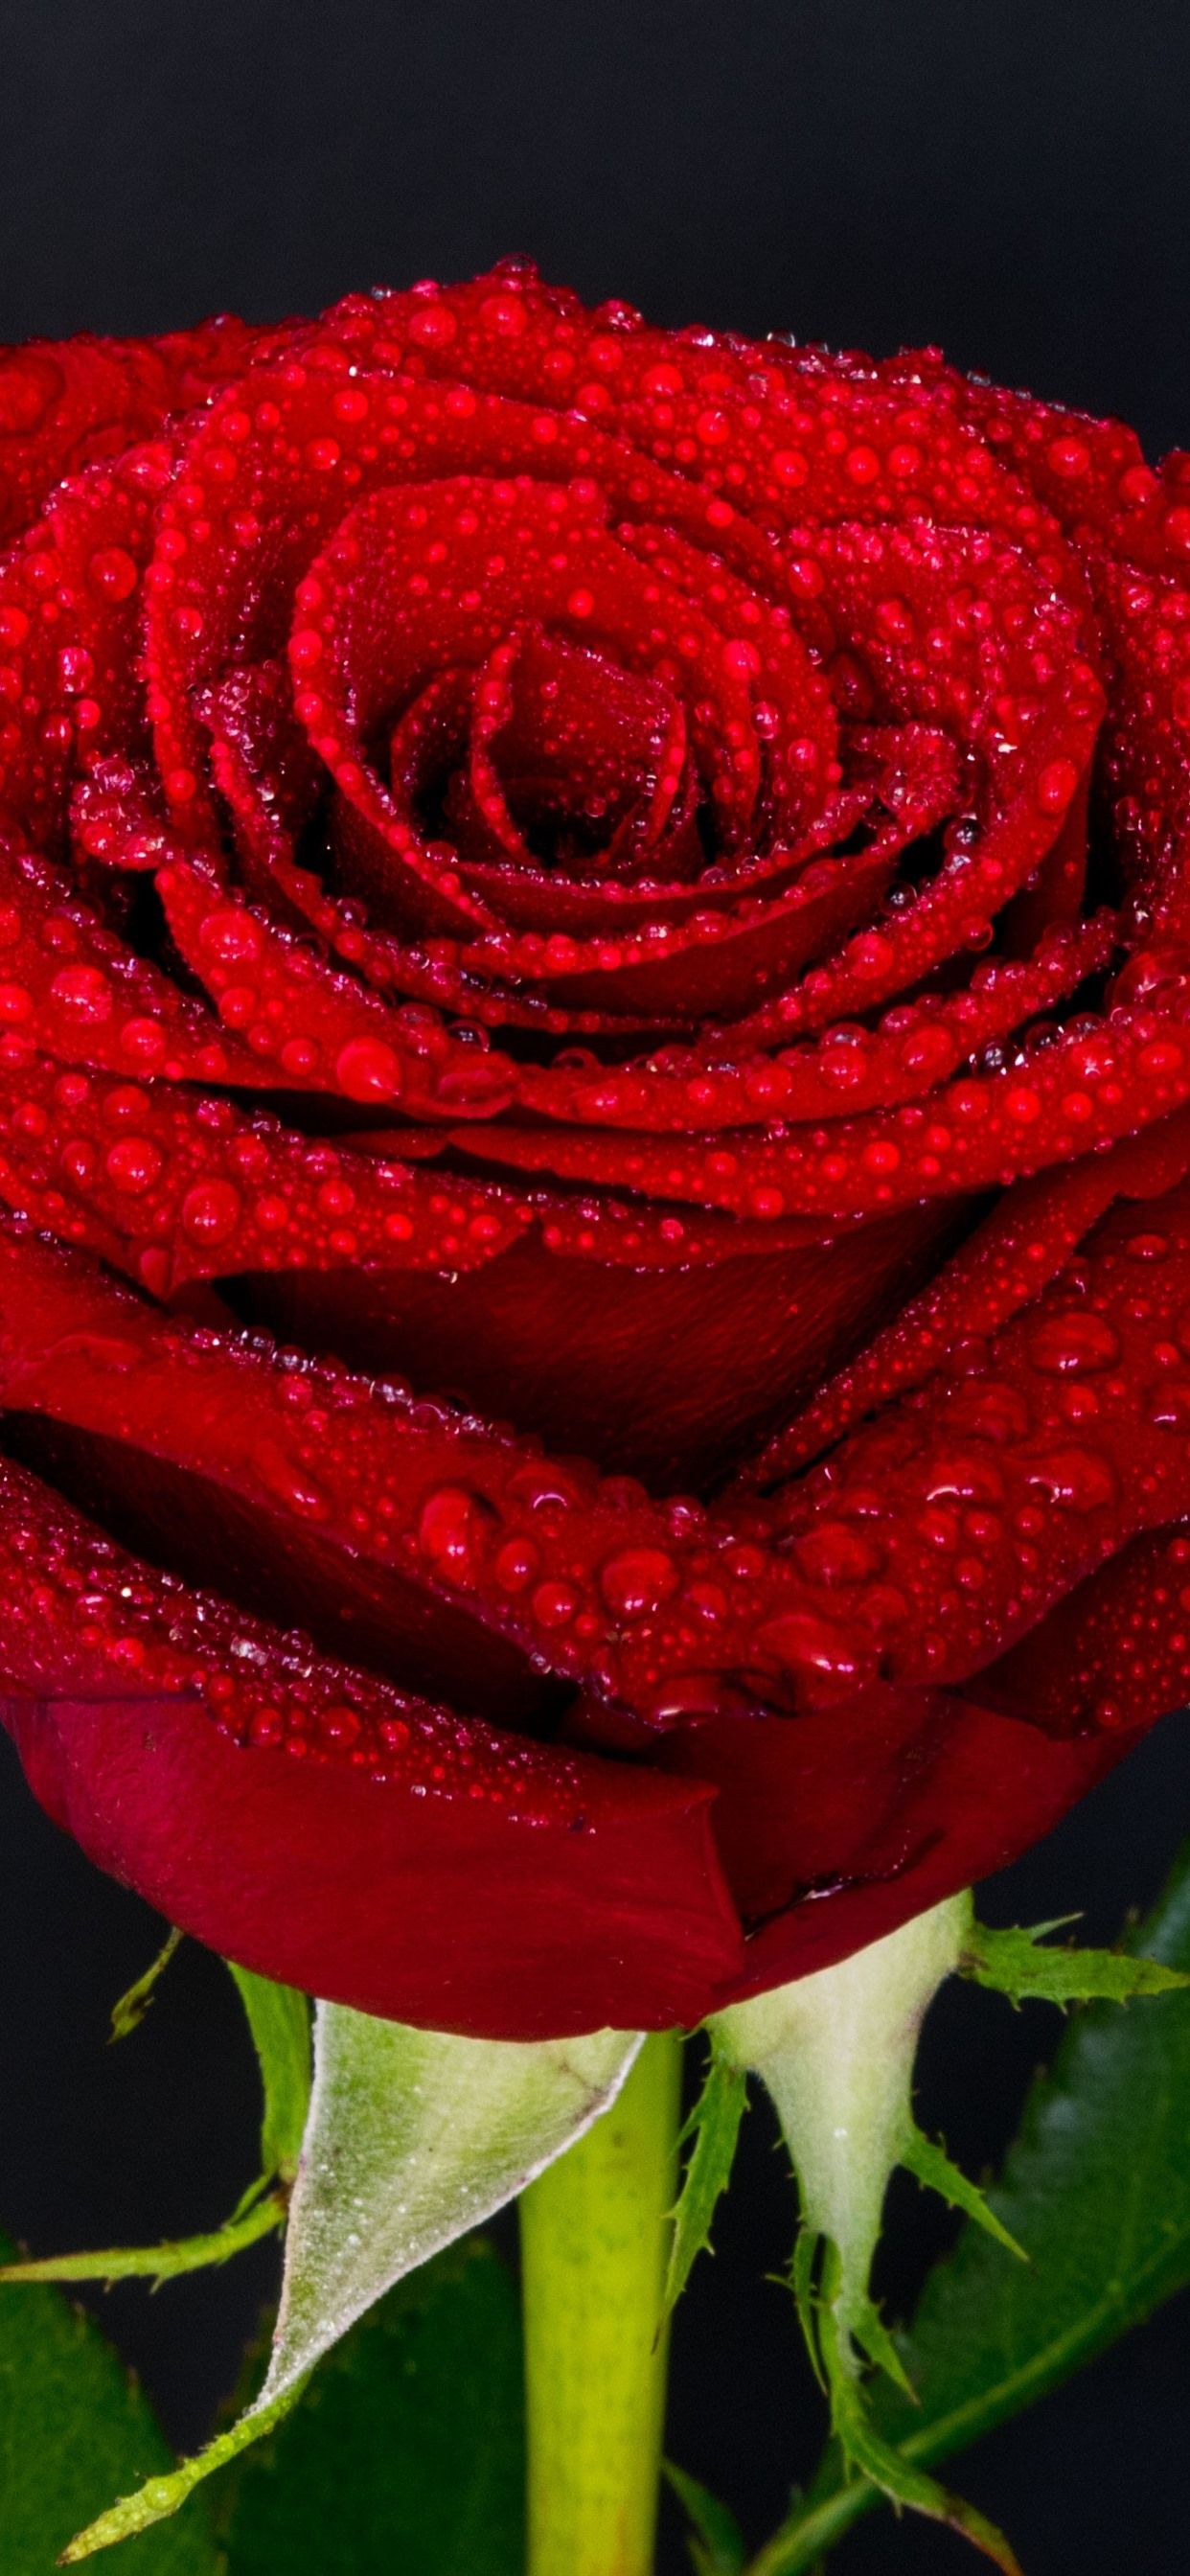 Red Rose, Petals, Water Droplets 1242x2688 IPhone 11 Pro XS Max Wallpaper, Background, Picture, Image